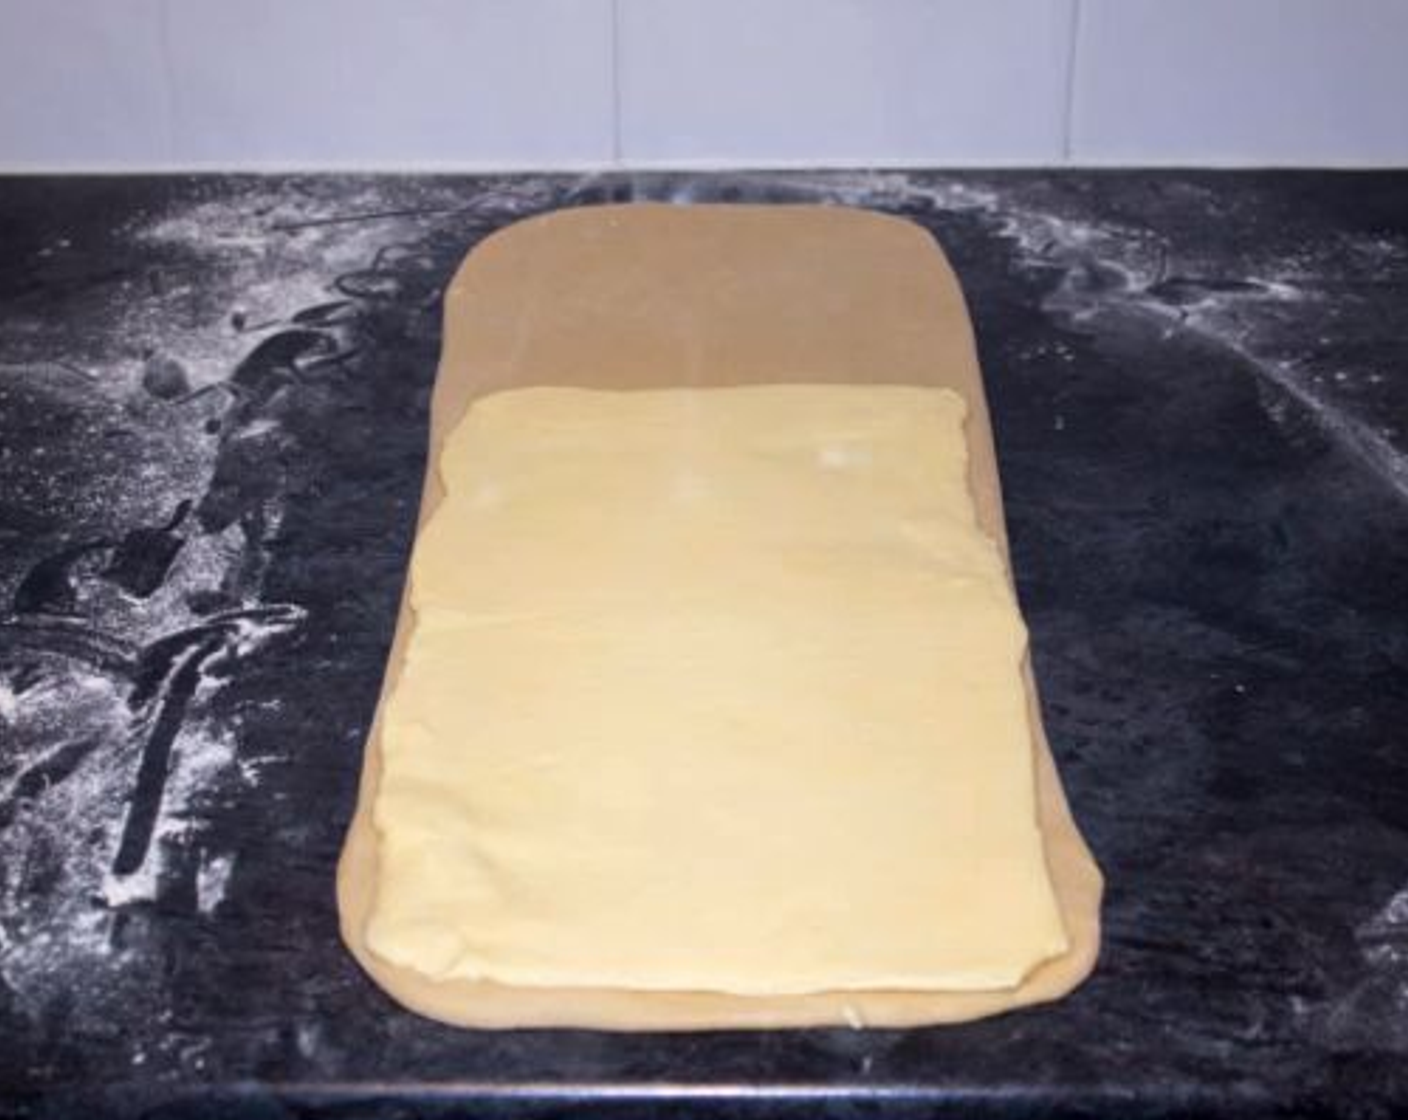 step 7 Then take the butter rectangle and place it over the bottom 2 thirds of the dough. Fold the top third over so it overlaps half of the butter.